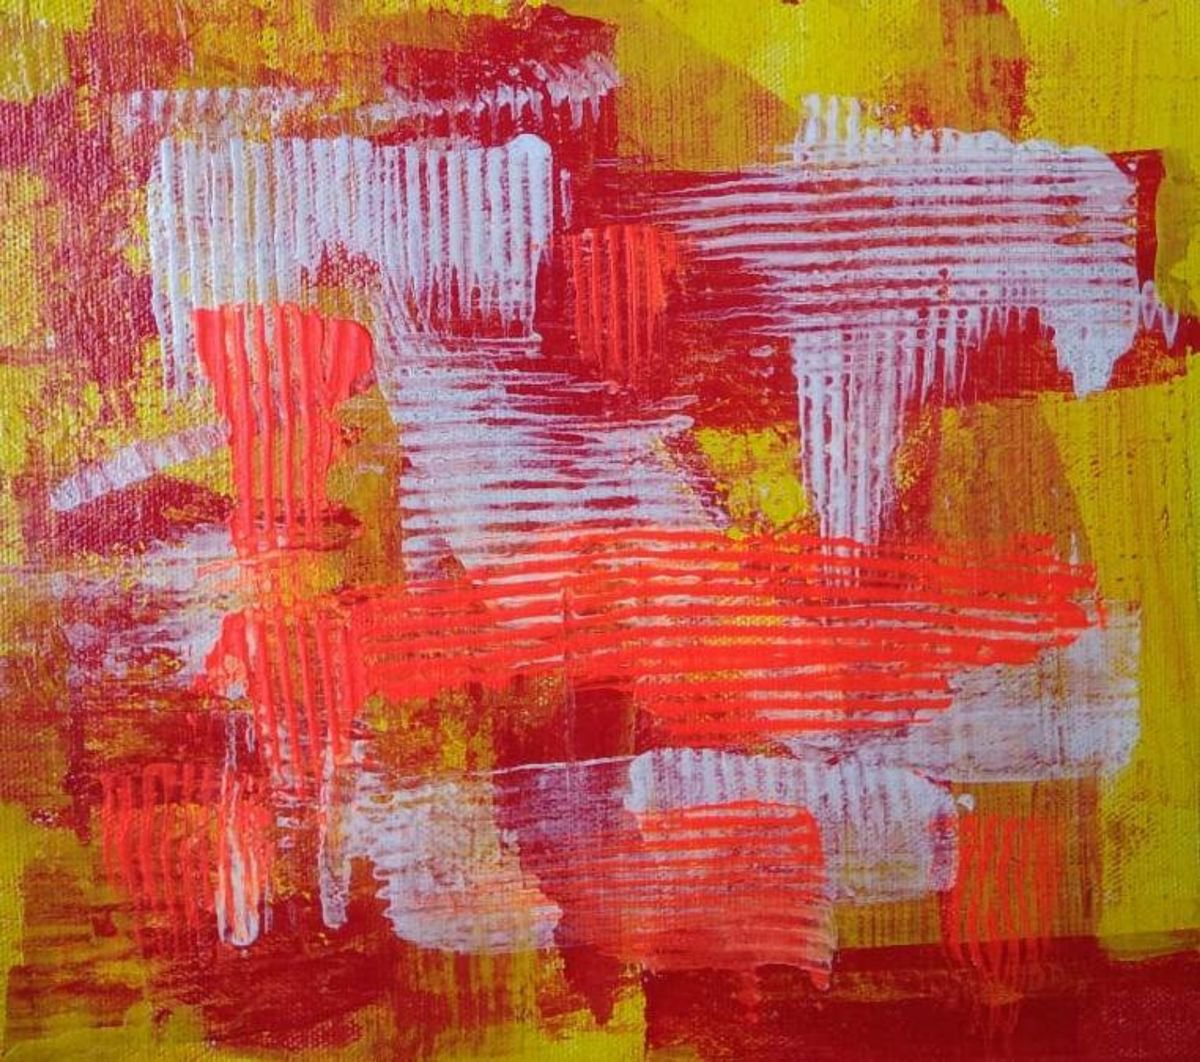 Abstract !! Small Abstract Paintings !! Set of 2 !! Yellow, Red,Orange,White Painting !! D... by Amita Dand